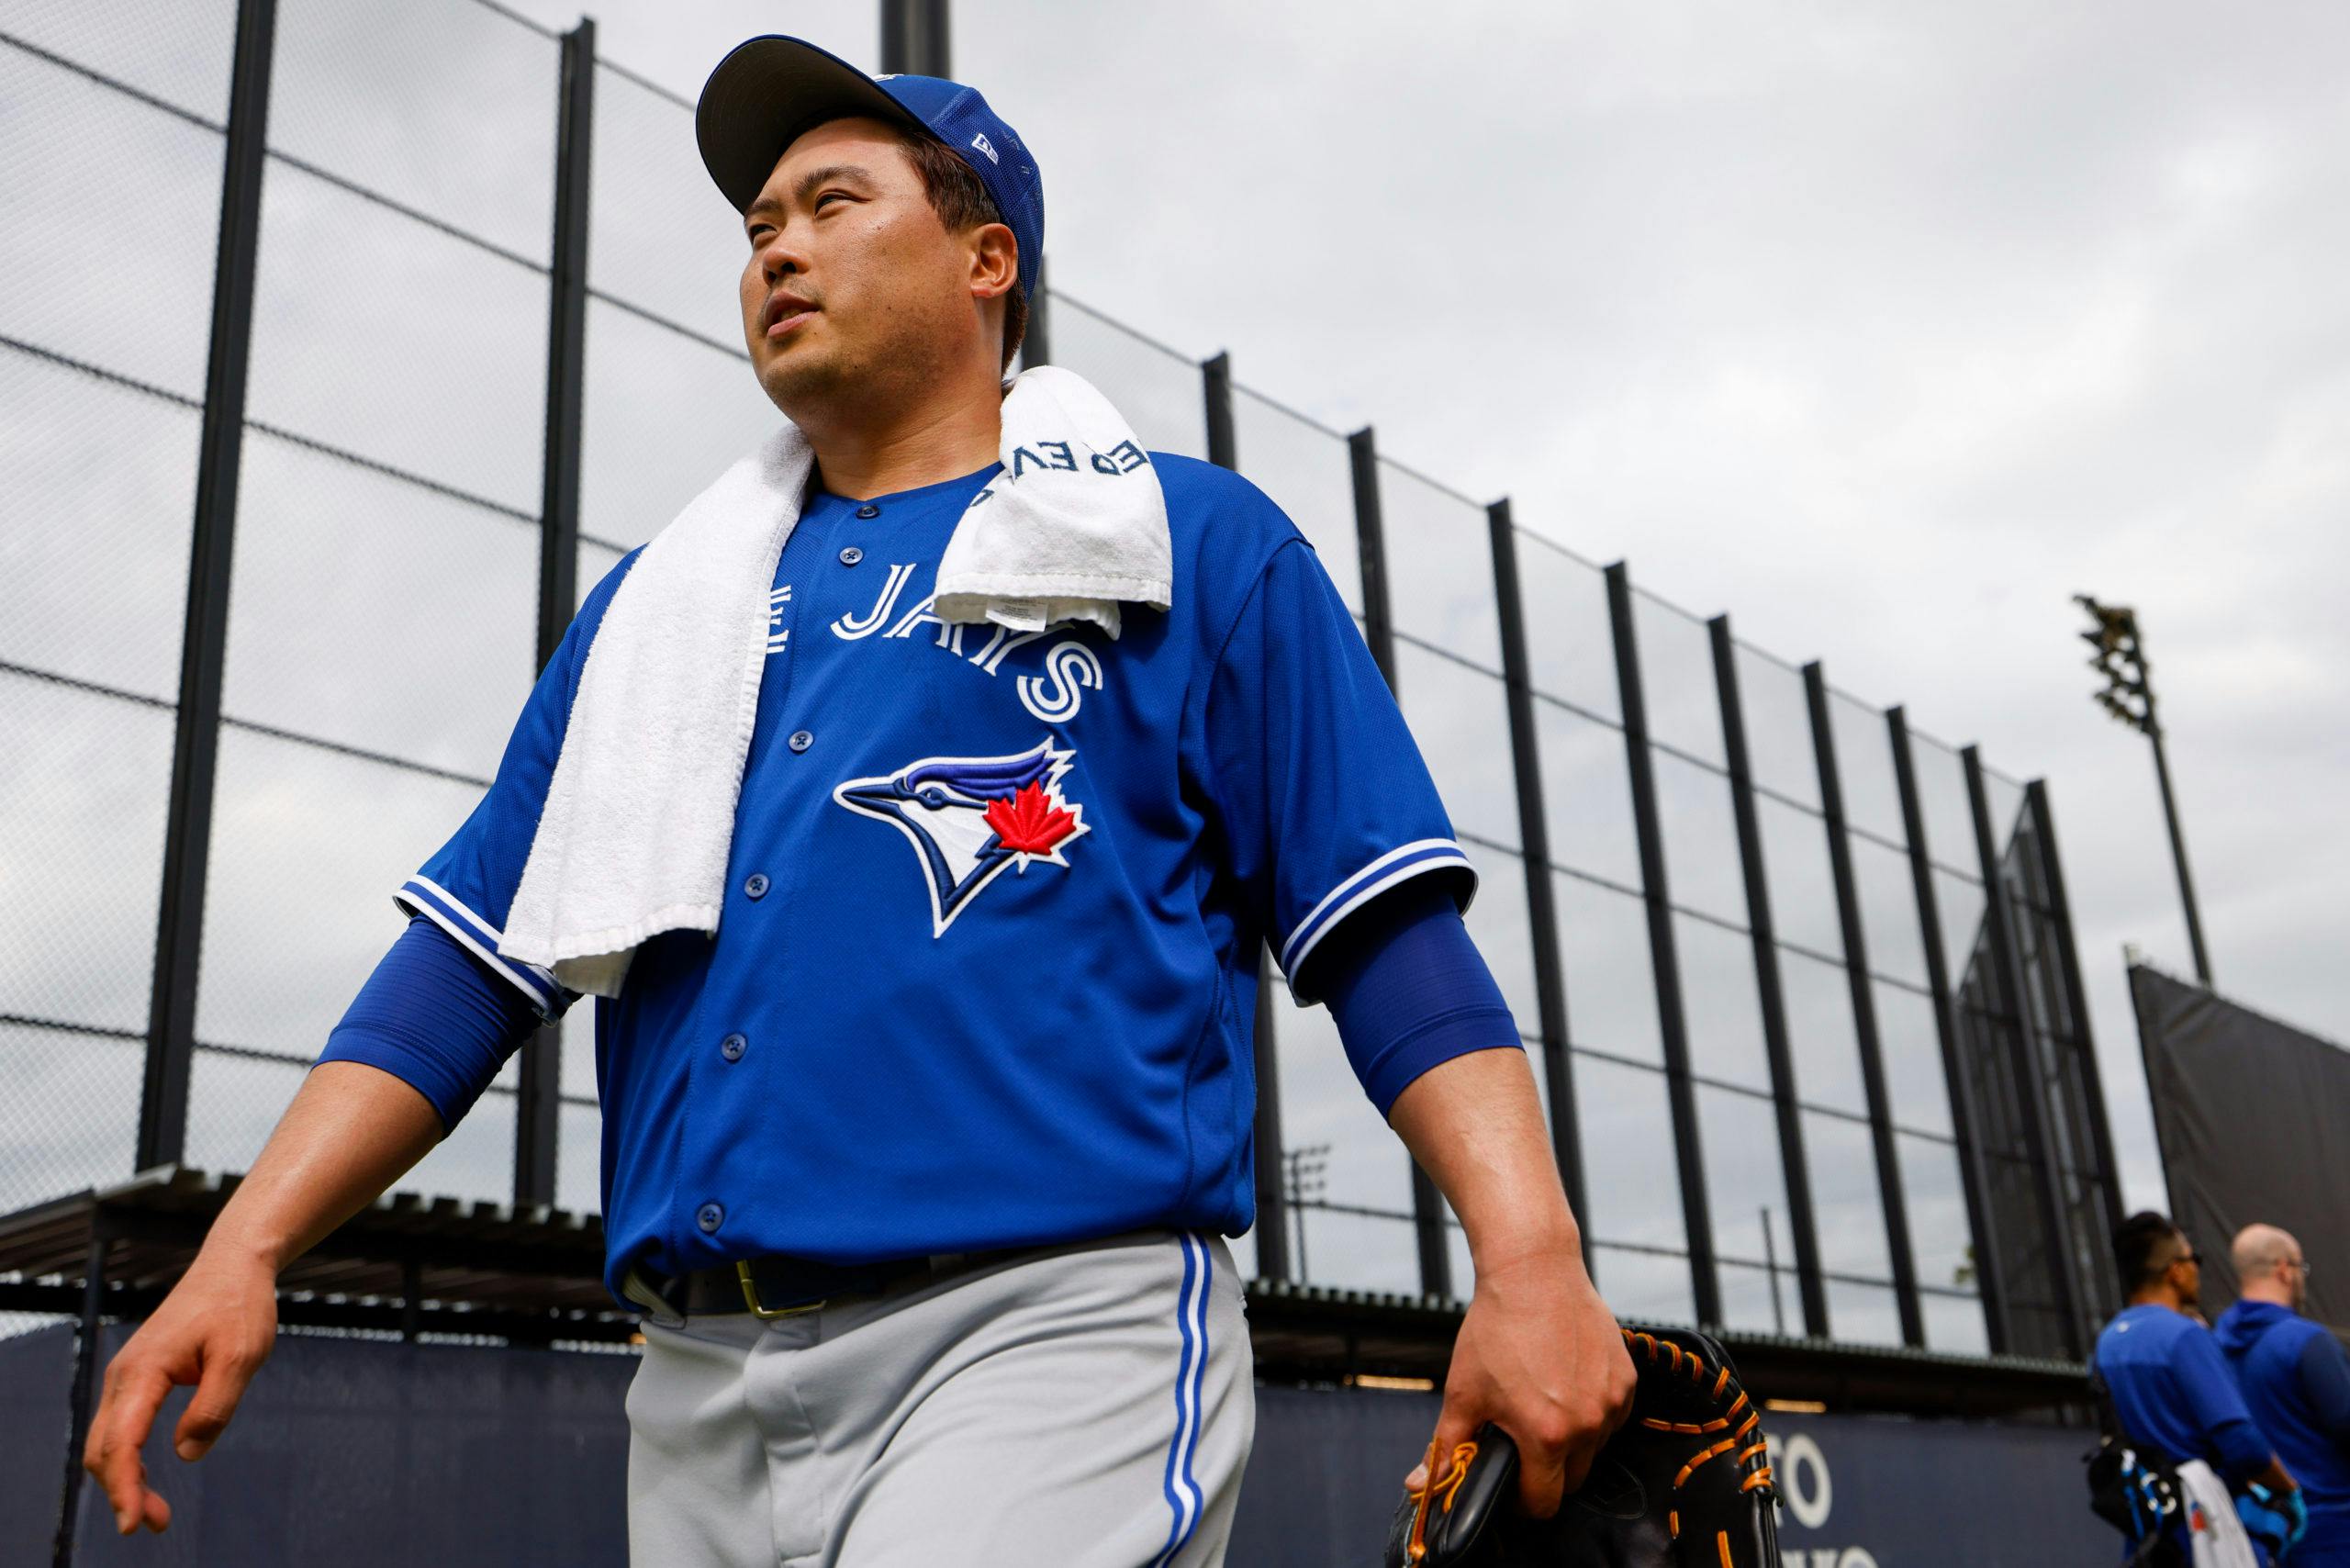 Hyun Jin Ryu's injury, why his contract was worthwhile, and the